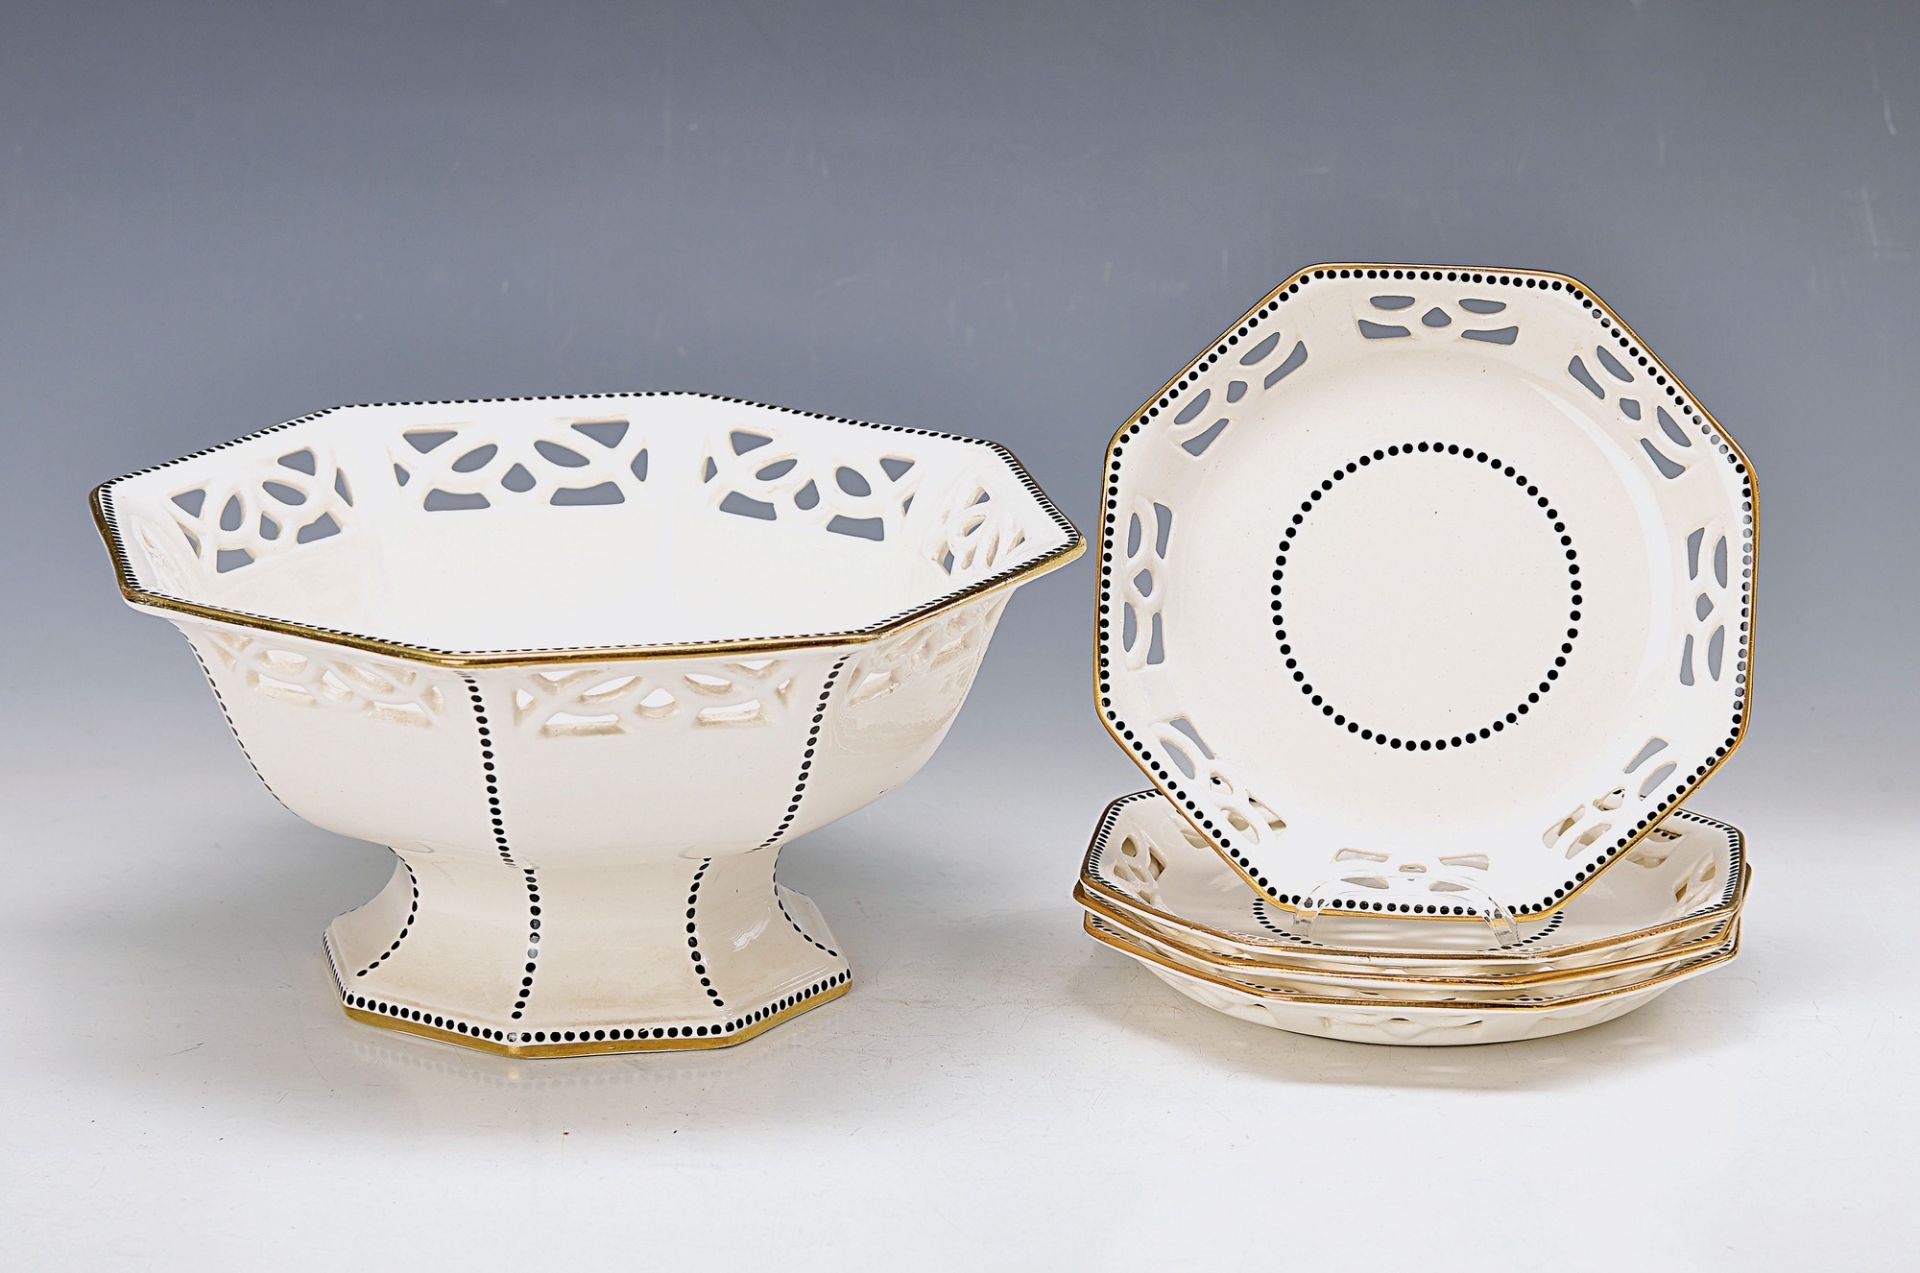 Obstservice, Wächtersbach around 1900/10, footbowl and four plates, stoneware, with breakthrough